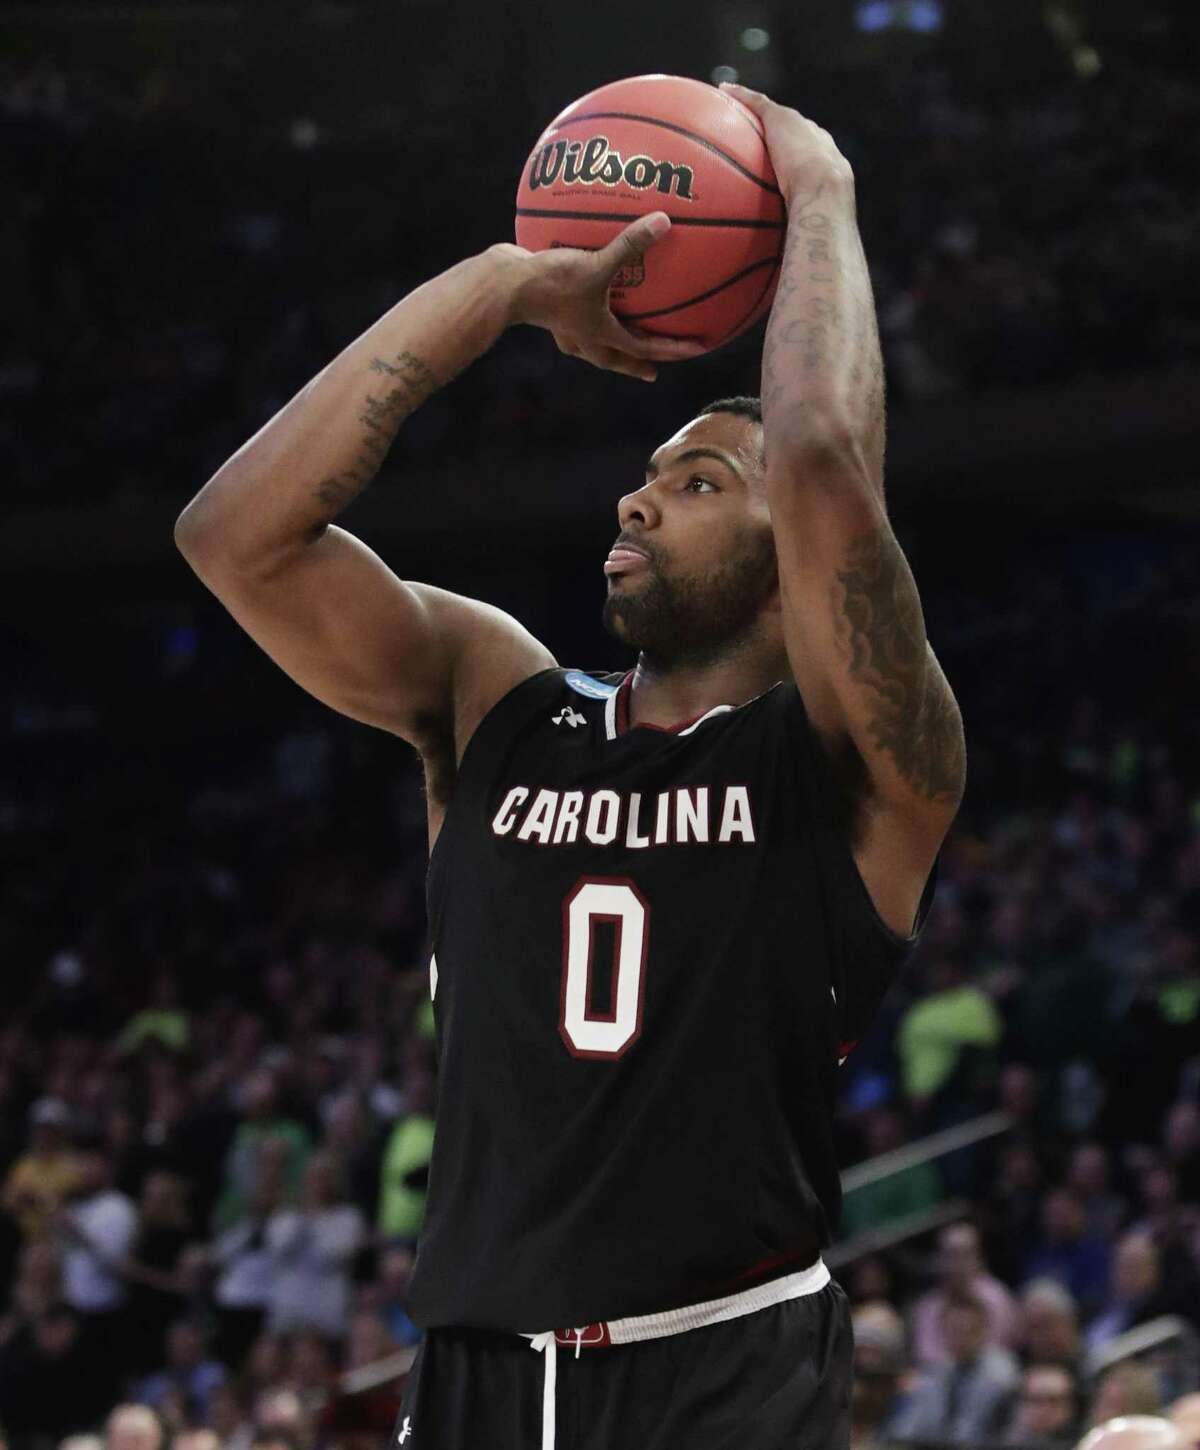 South Carolina guard Sindarius Thornwell puts up a shot against Baylor in the second half of an East Regional semifinal game of the NCAA Tournament on March 24, 2017, in New York.